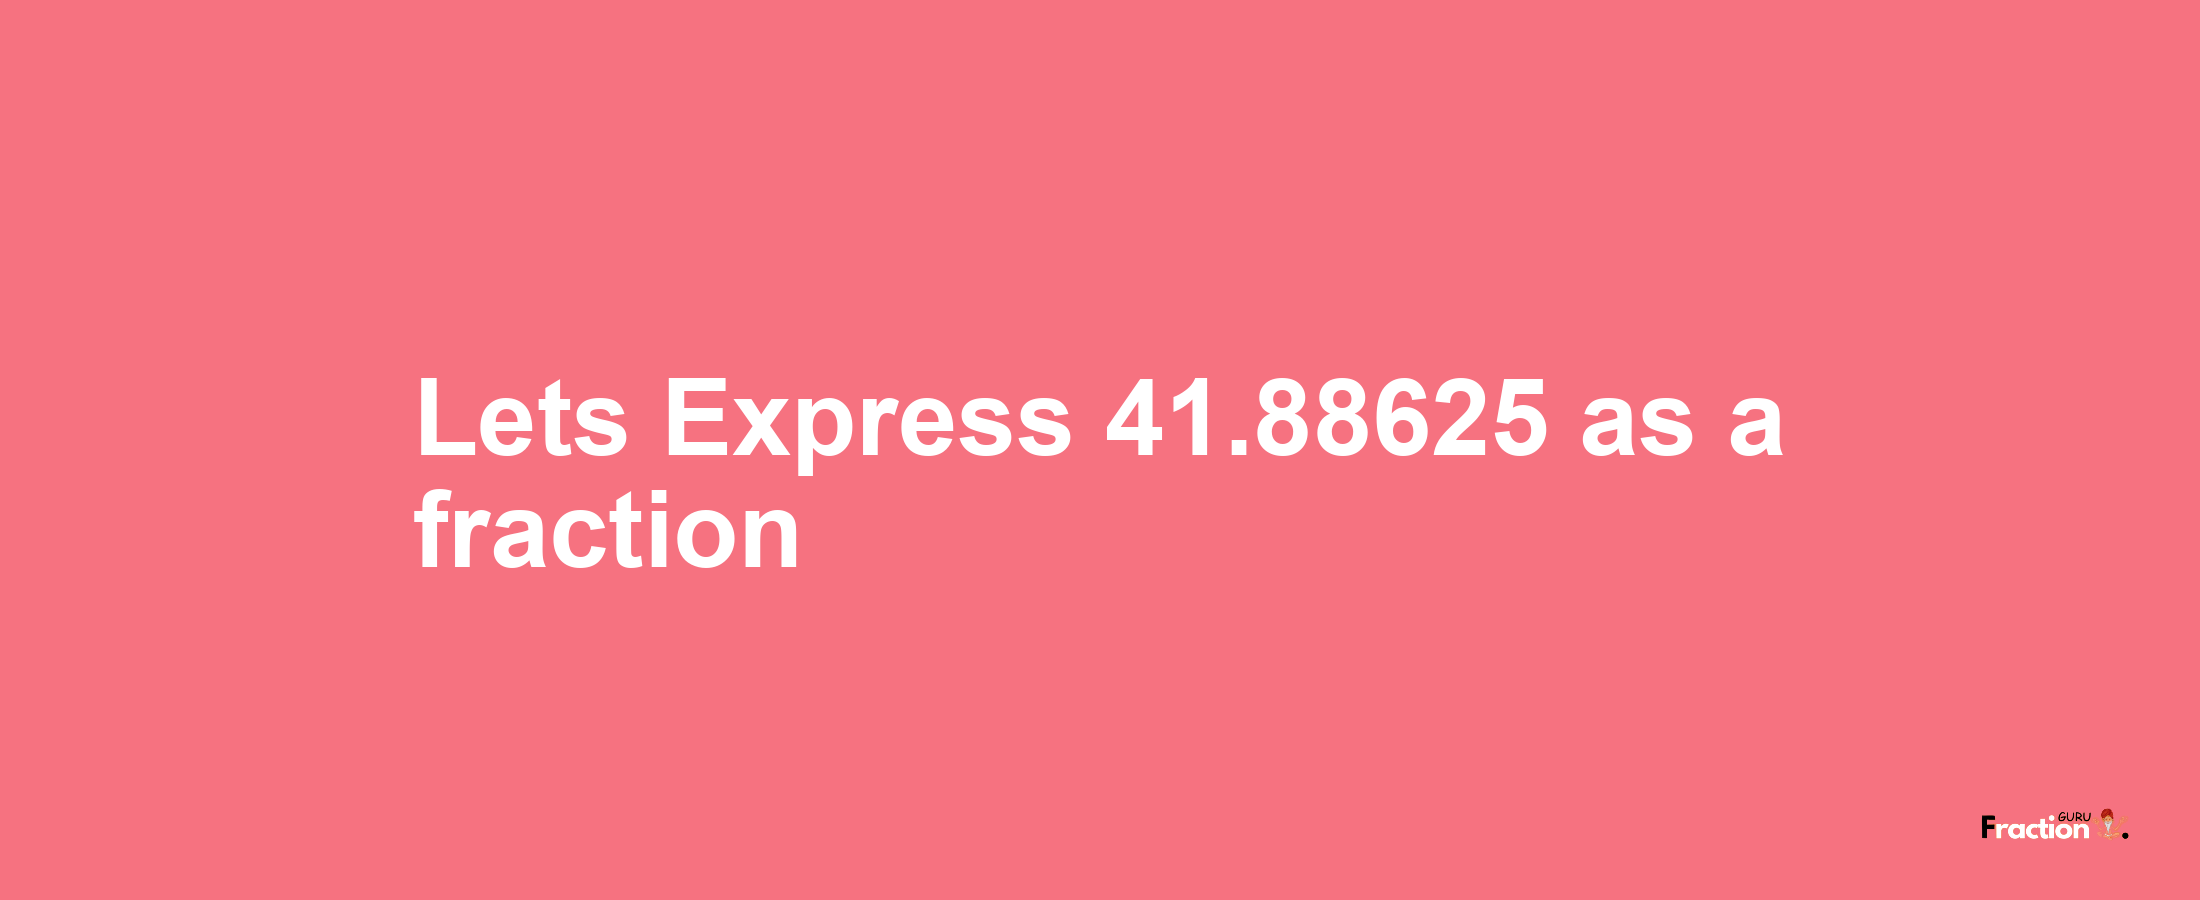 Lets Express 41.88625 as afraction